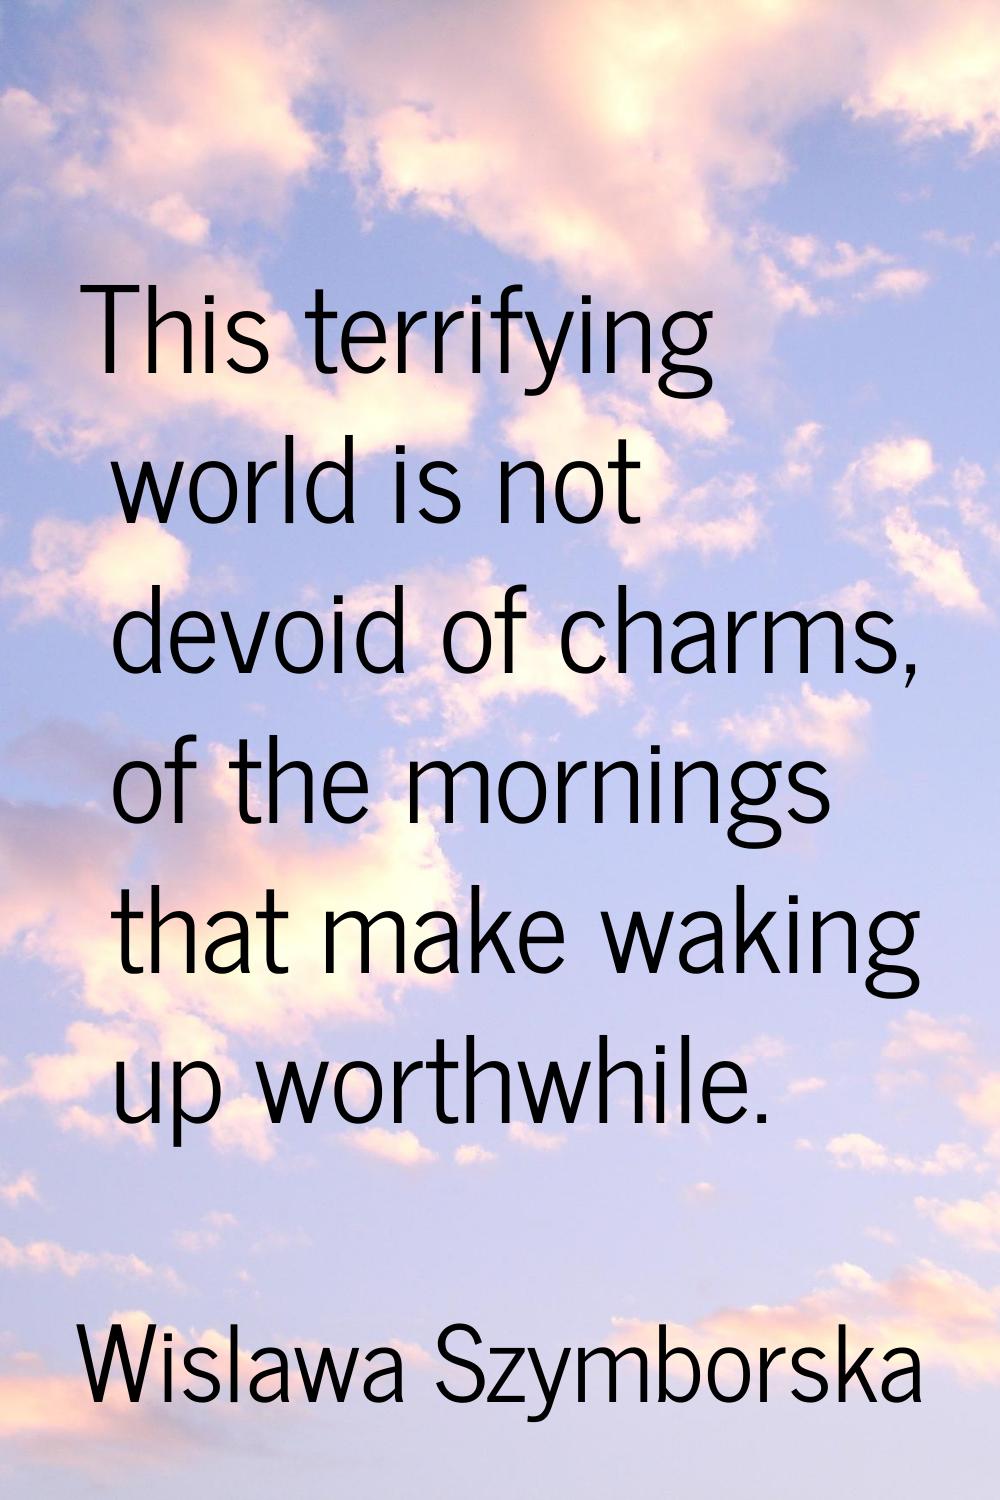 This terrifying world is not devoid of charms, of the mornings that make waking up worthwhile.